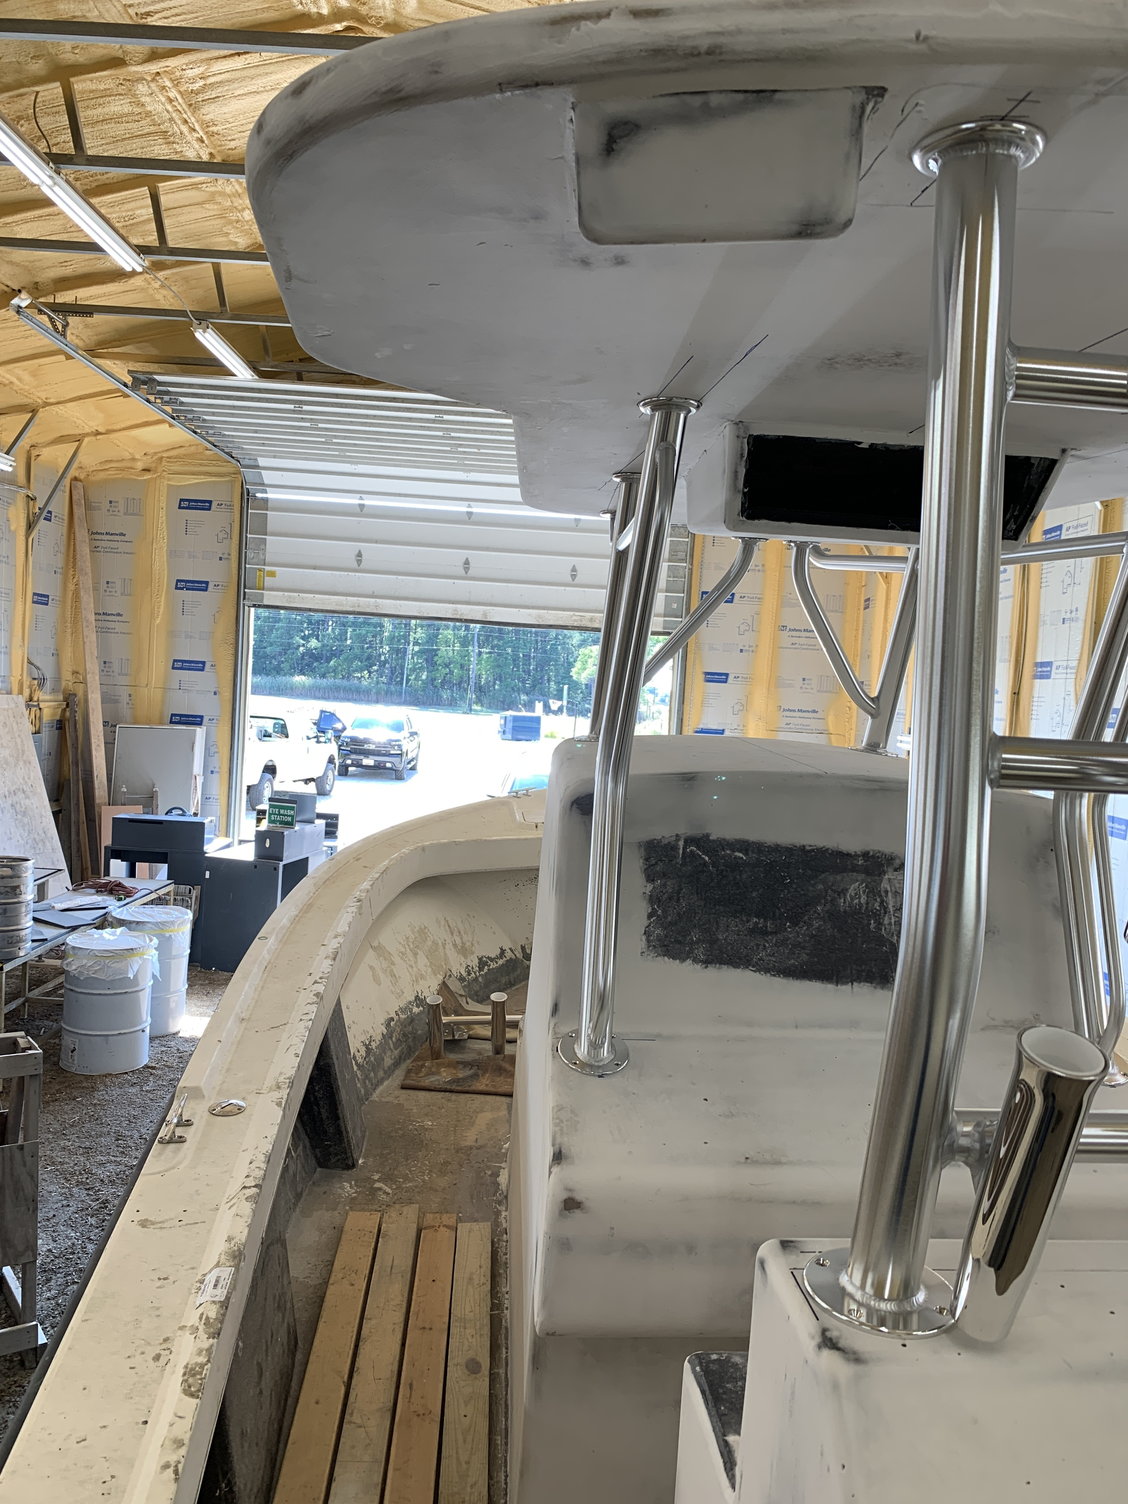 Contender center transom rod holder and extender - The Hull Truth - Boating  and Fishing Forum